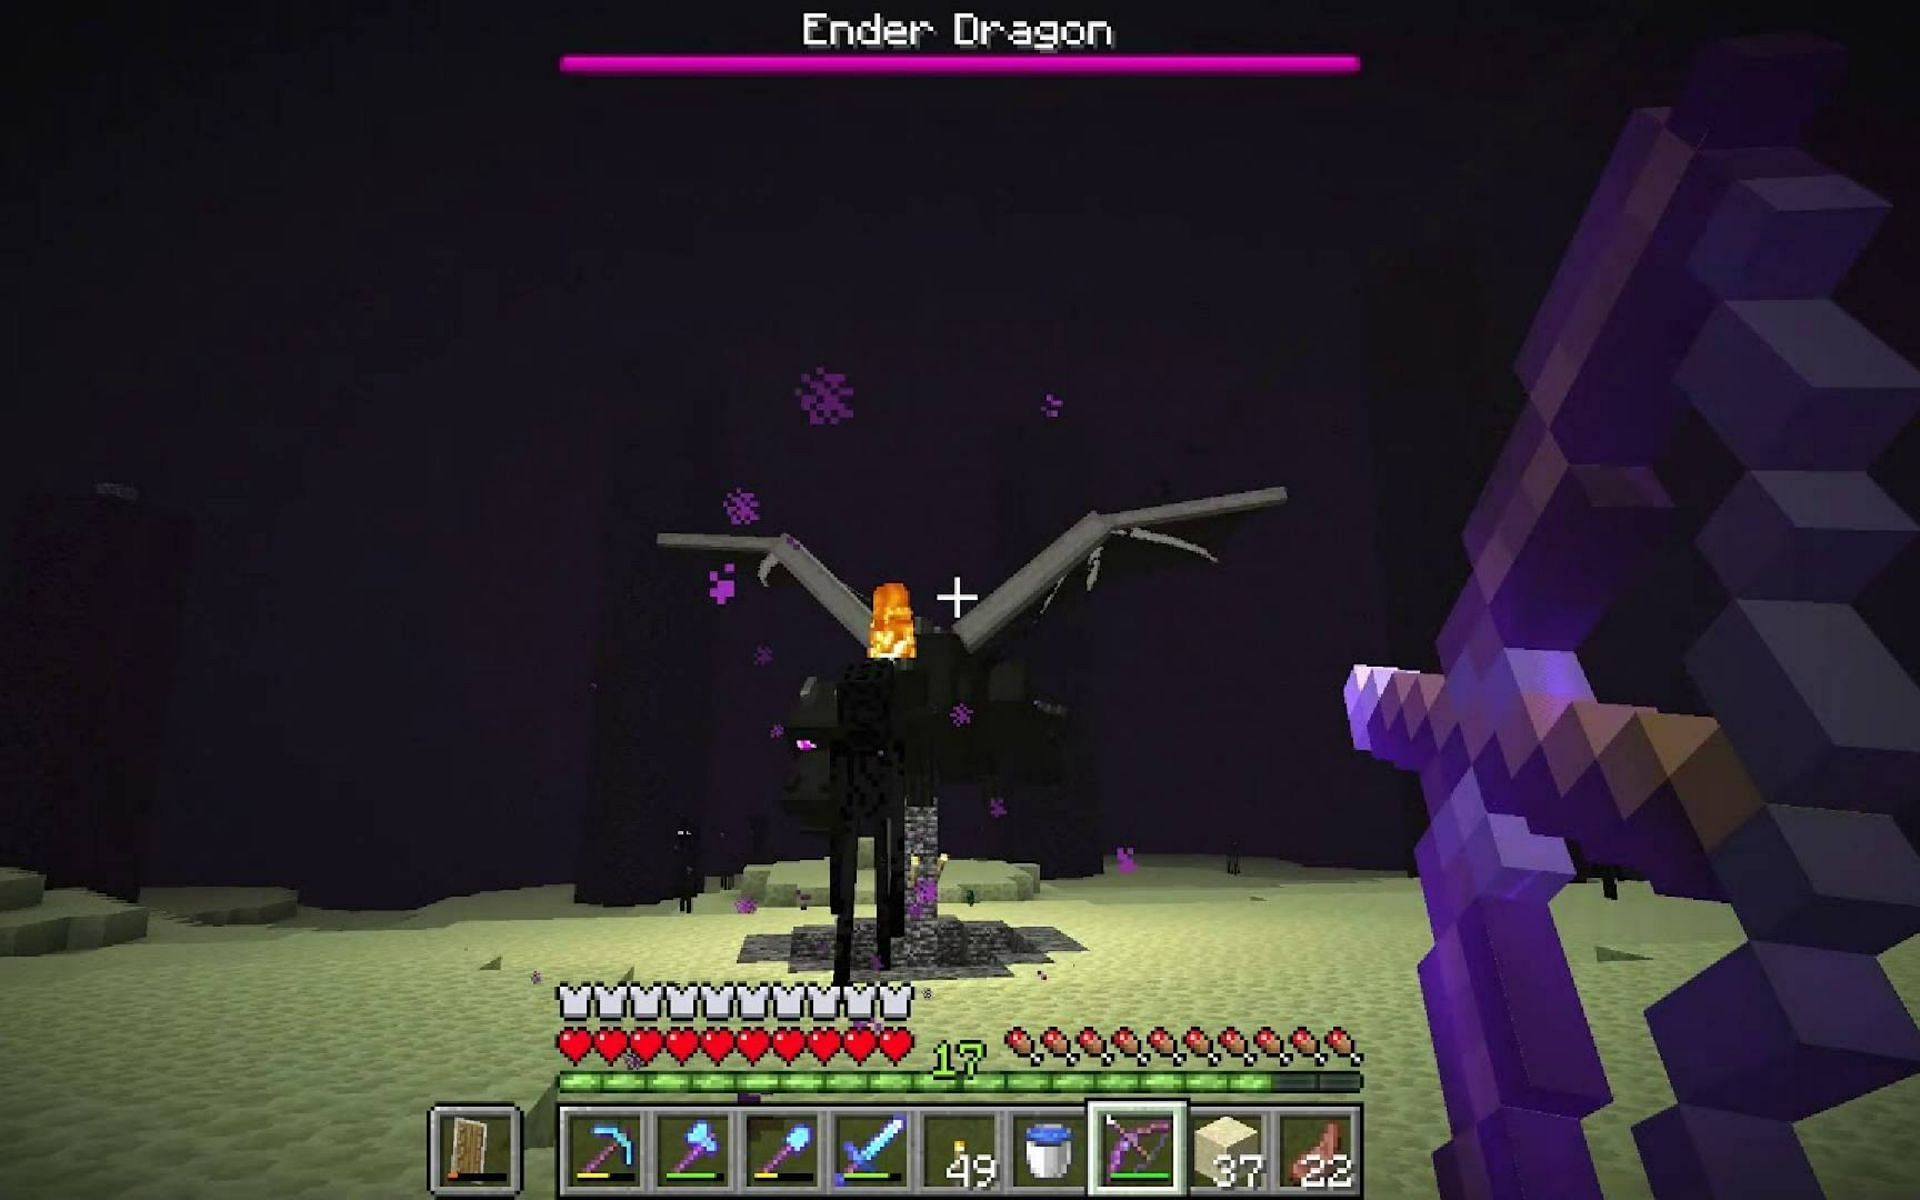 How to Defeat the Ender Dragon in Minecraft the Easy Way